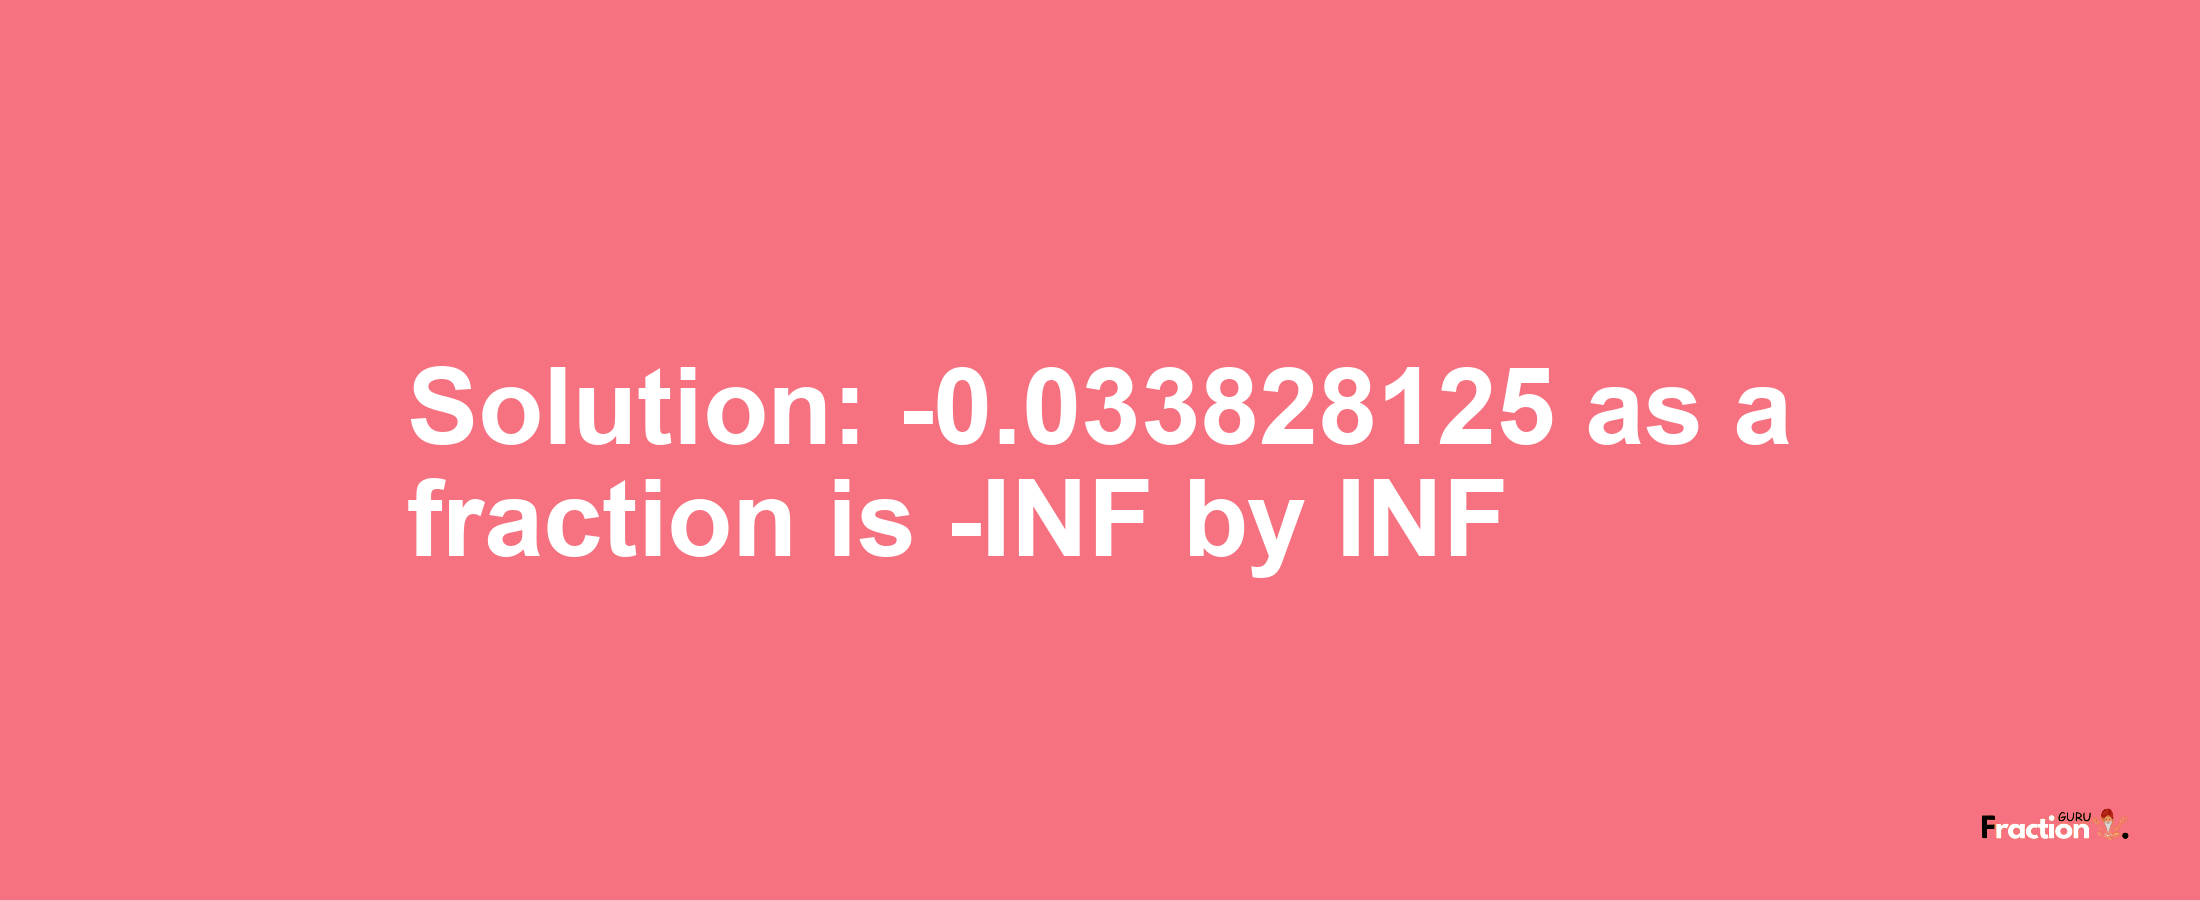 Solution:-0.033828125 as a fraction is -INF/INF